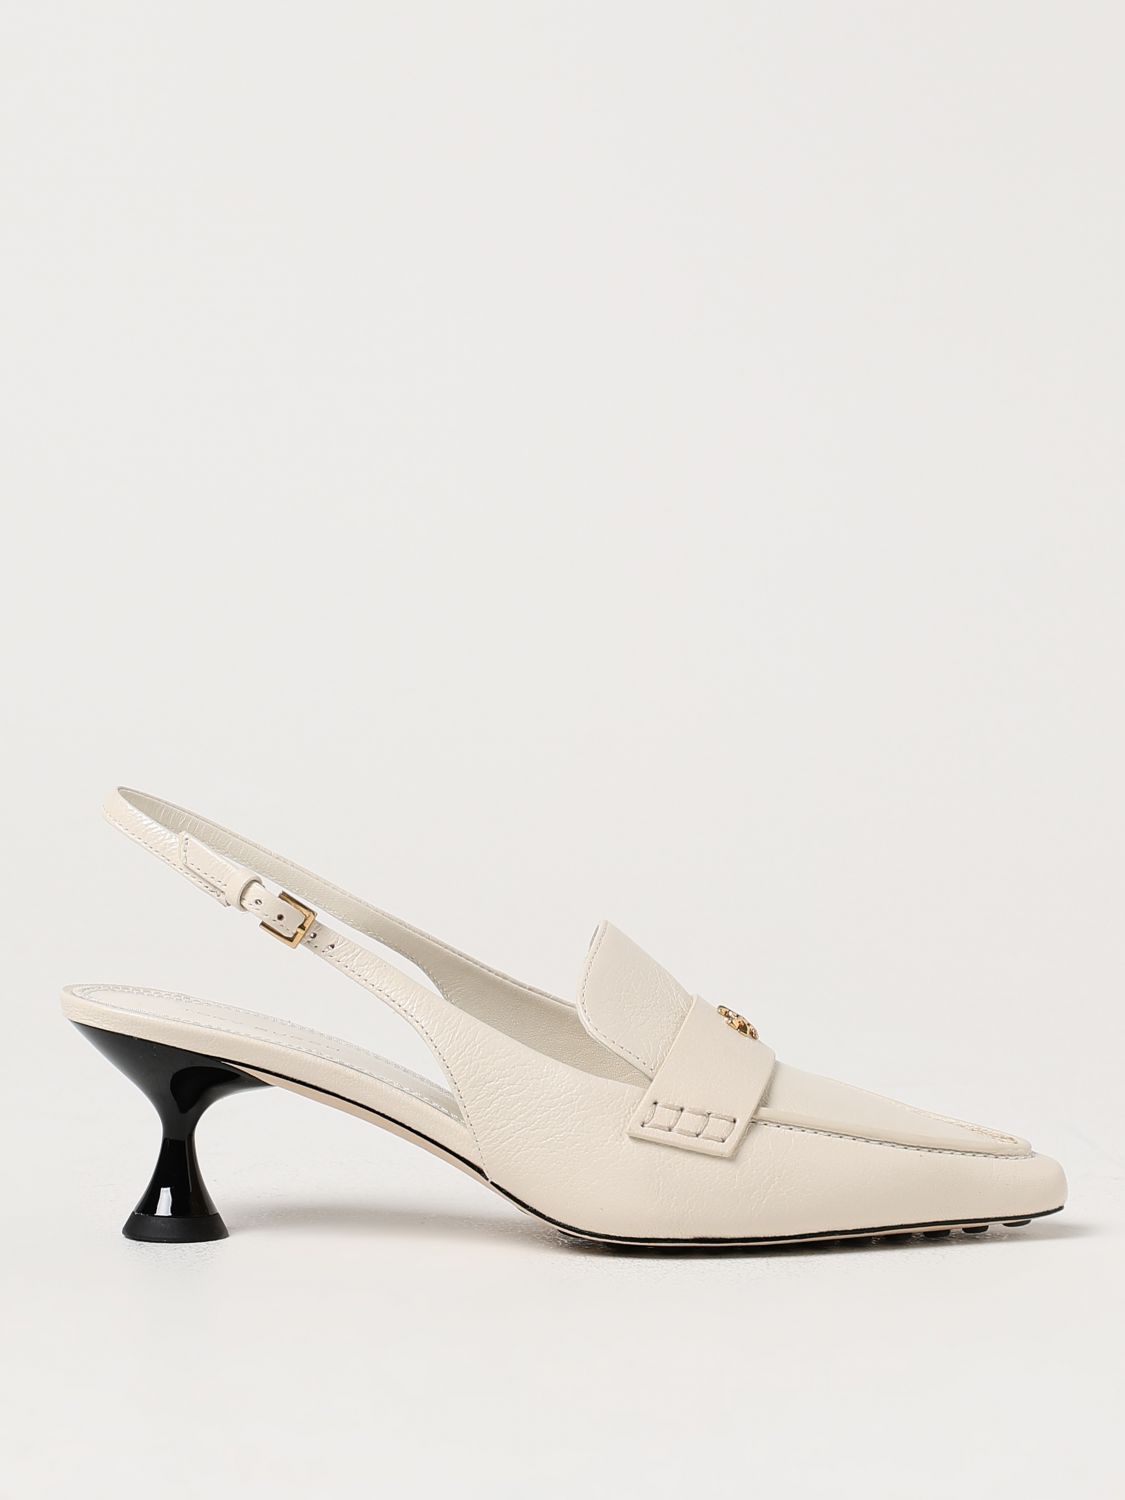 Tory Burch Flat Shoes TORY BURCH Woman color Ivory